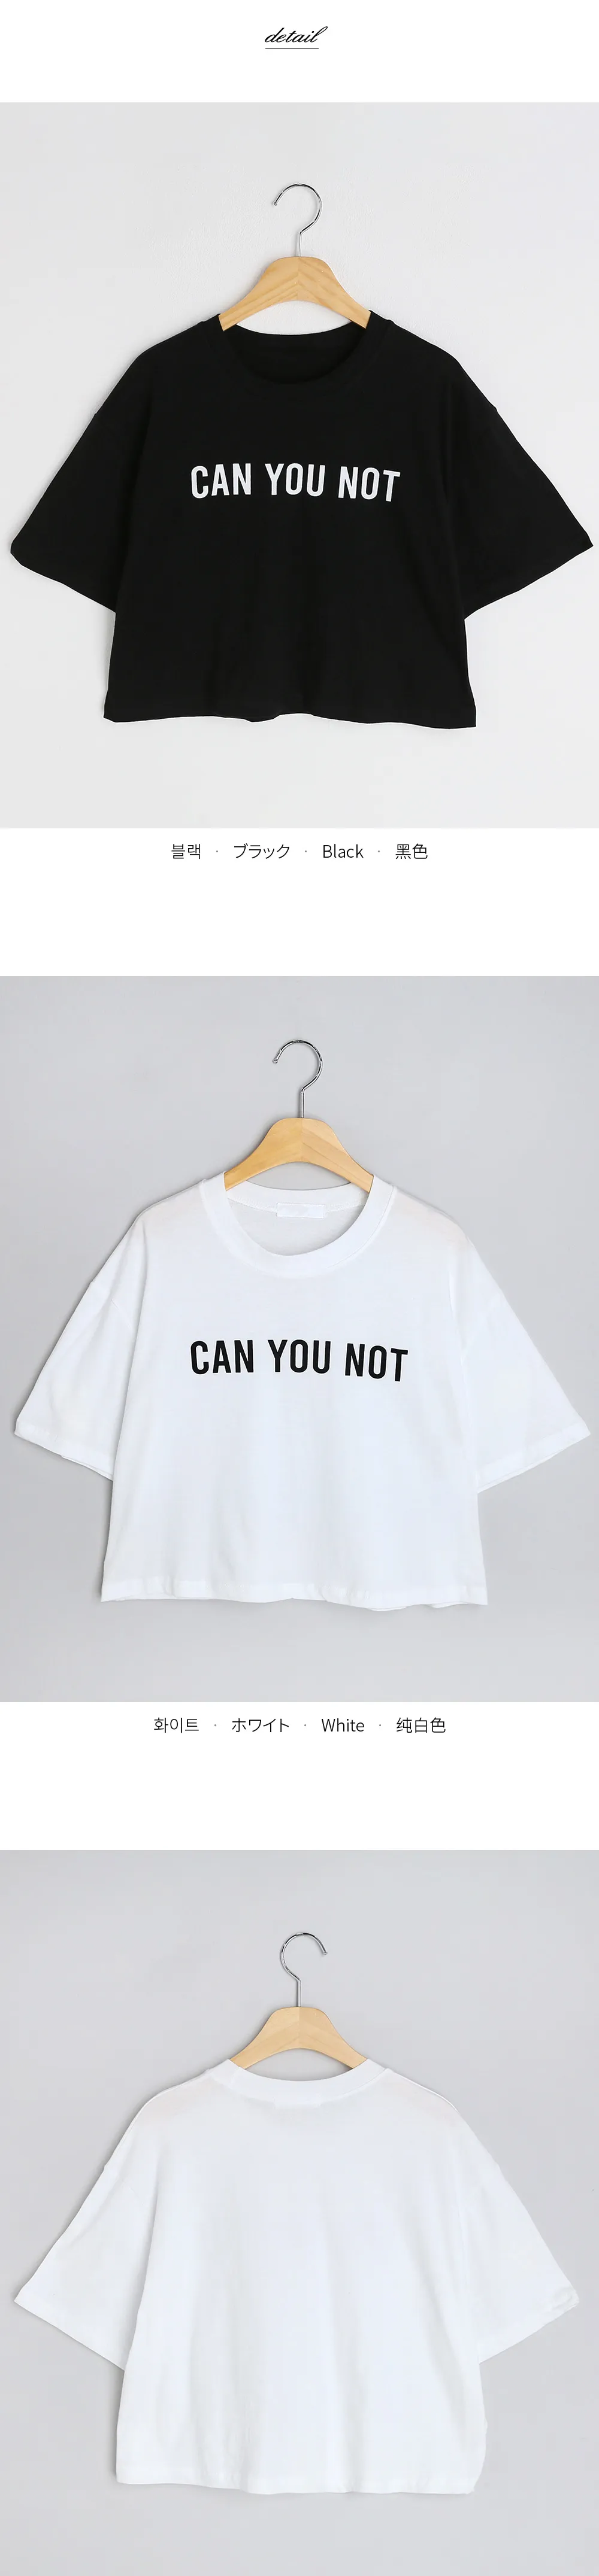 CAN YOU NOTクロップドTシャツ・全2色 | 詳細画像11